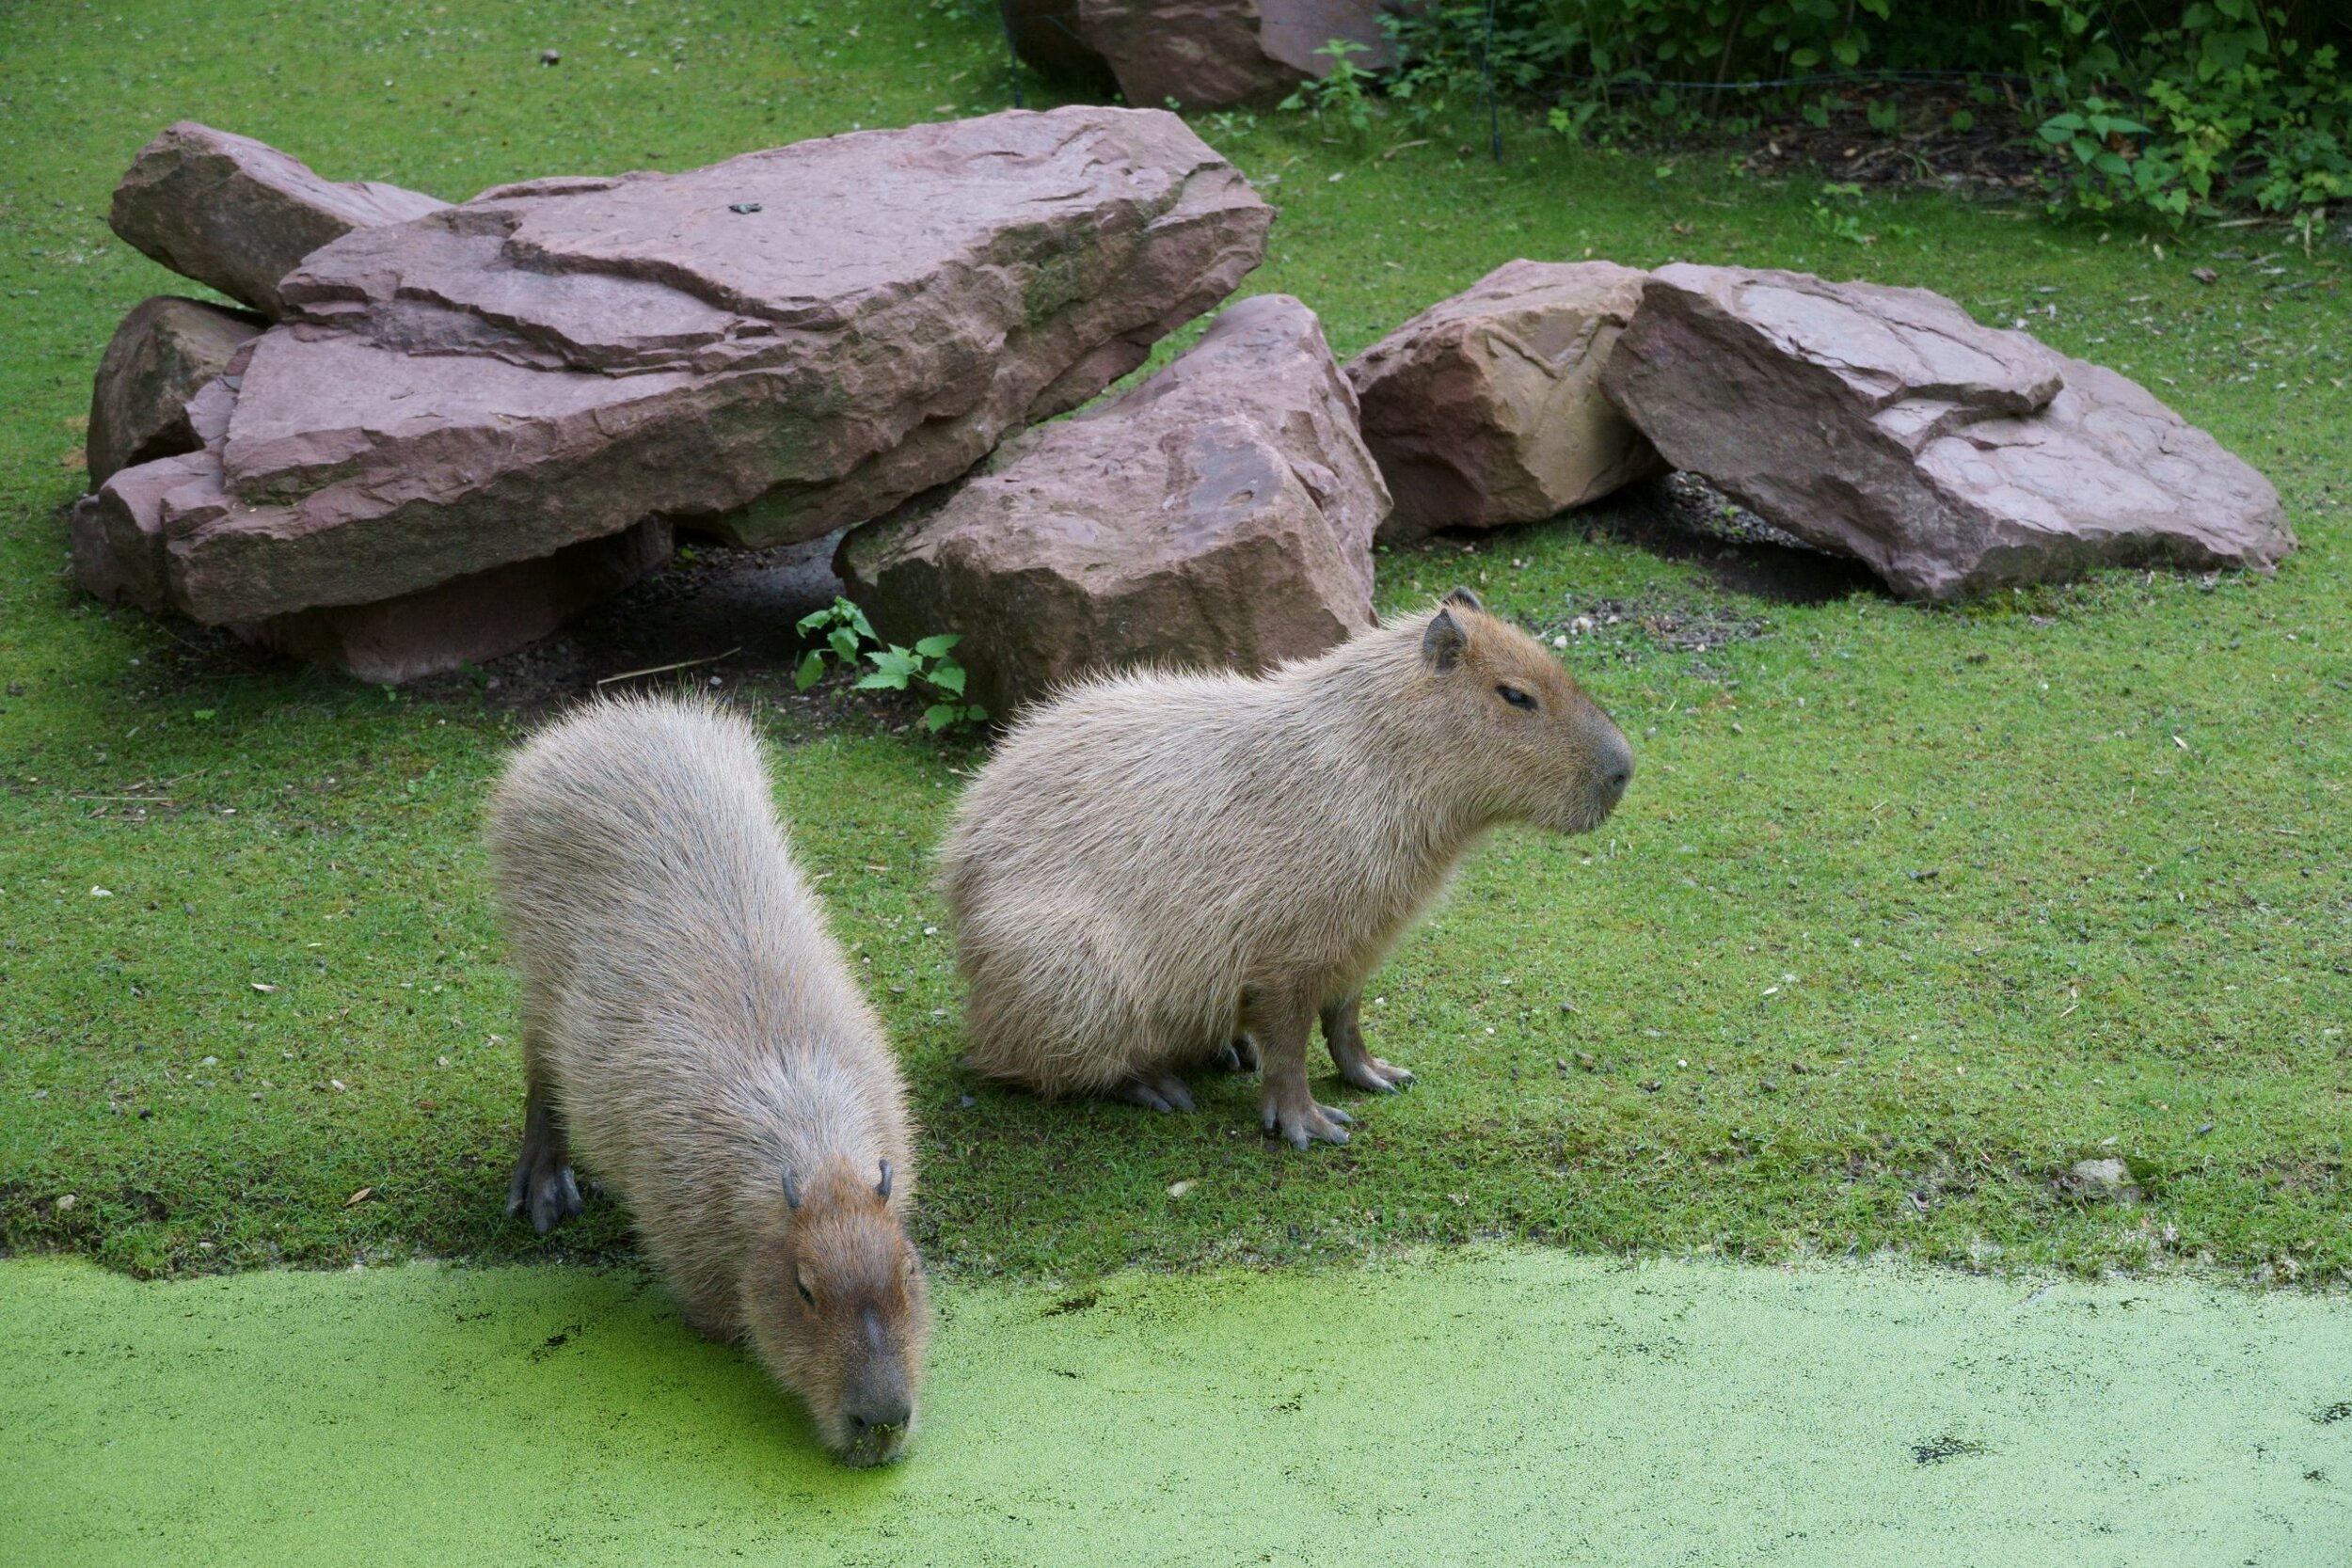 The Capybara is waiting for you at Zoo Leipzig!